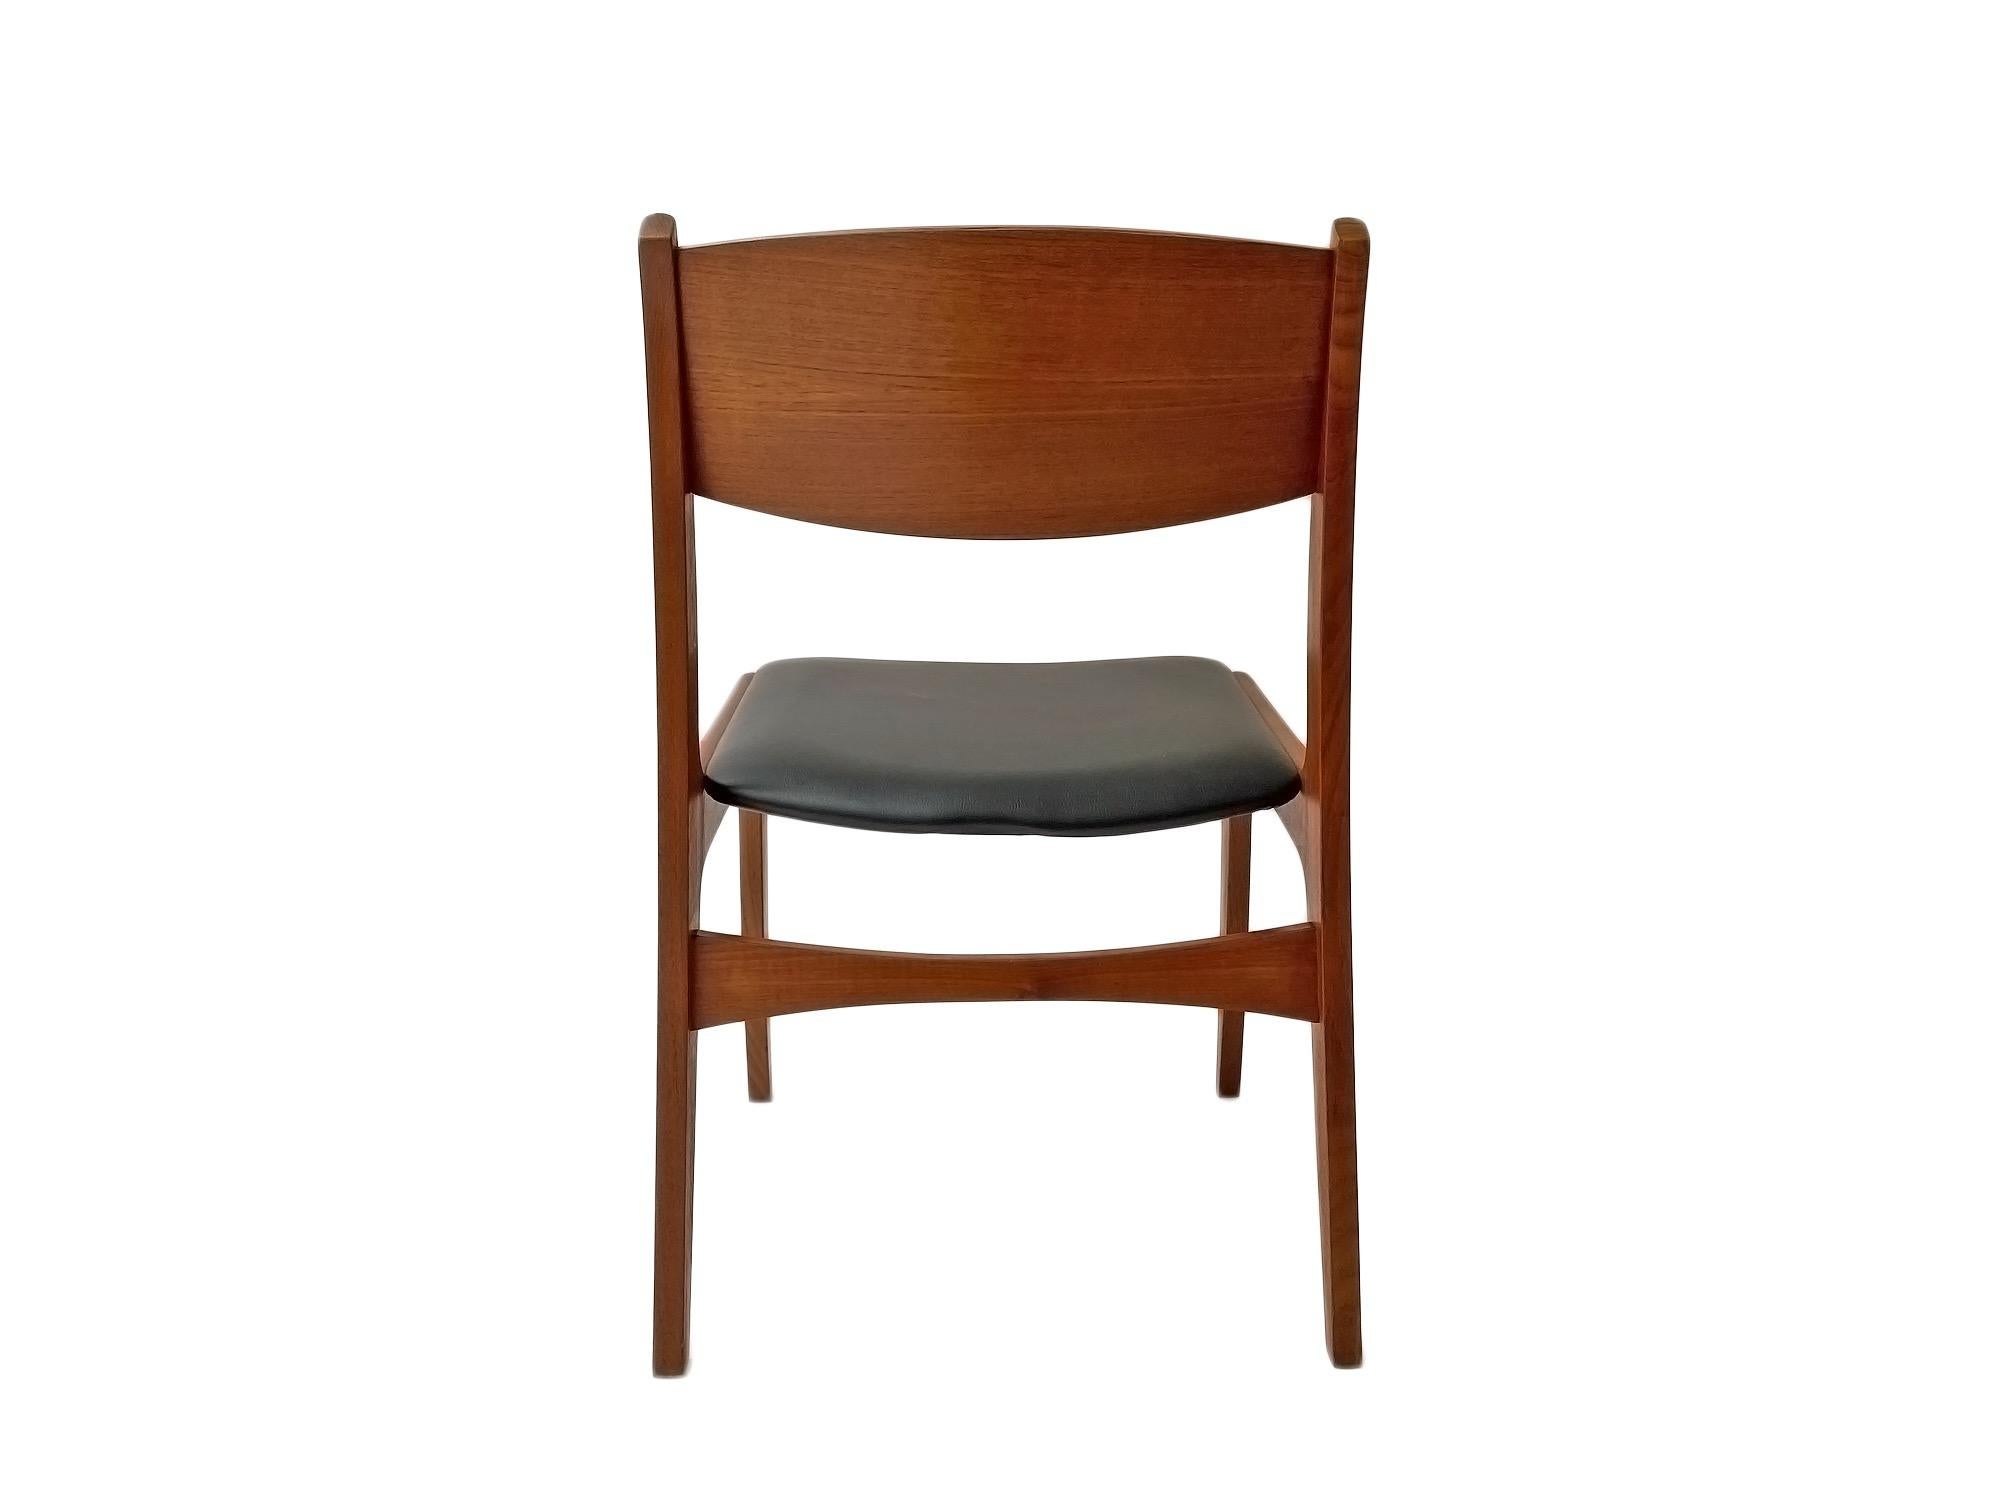 Mid-20th Century Danish Set of 4 Teak and Black Vinyl Dining Chairs, Mid Century 1960s For Sale